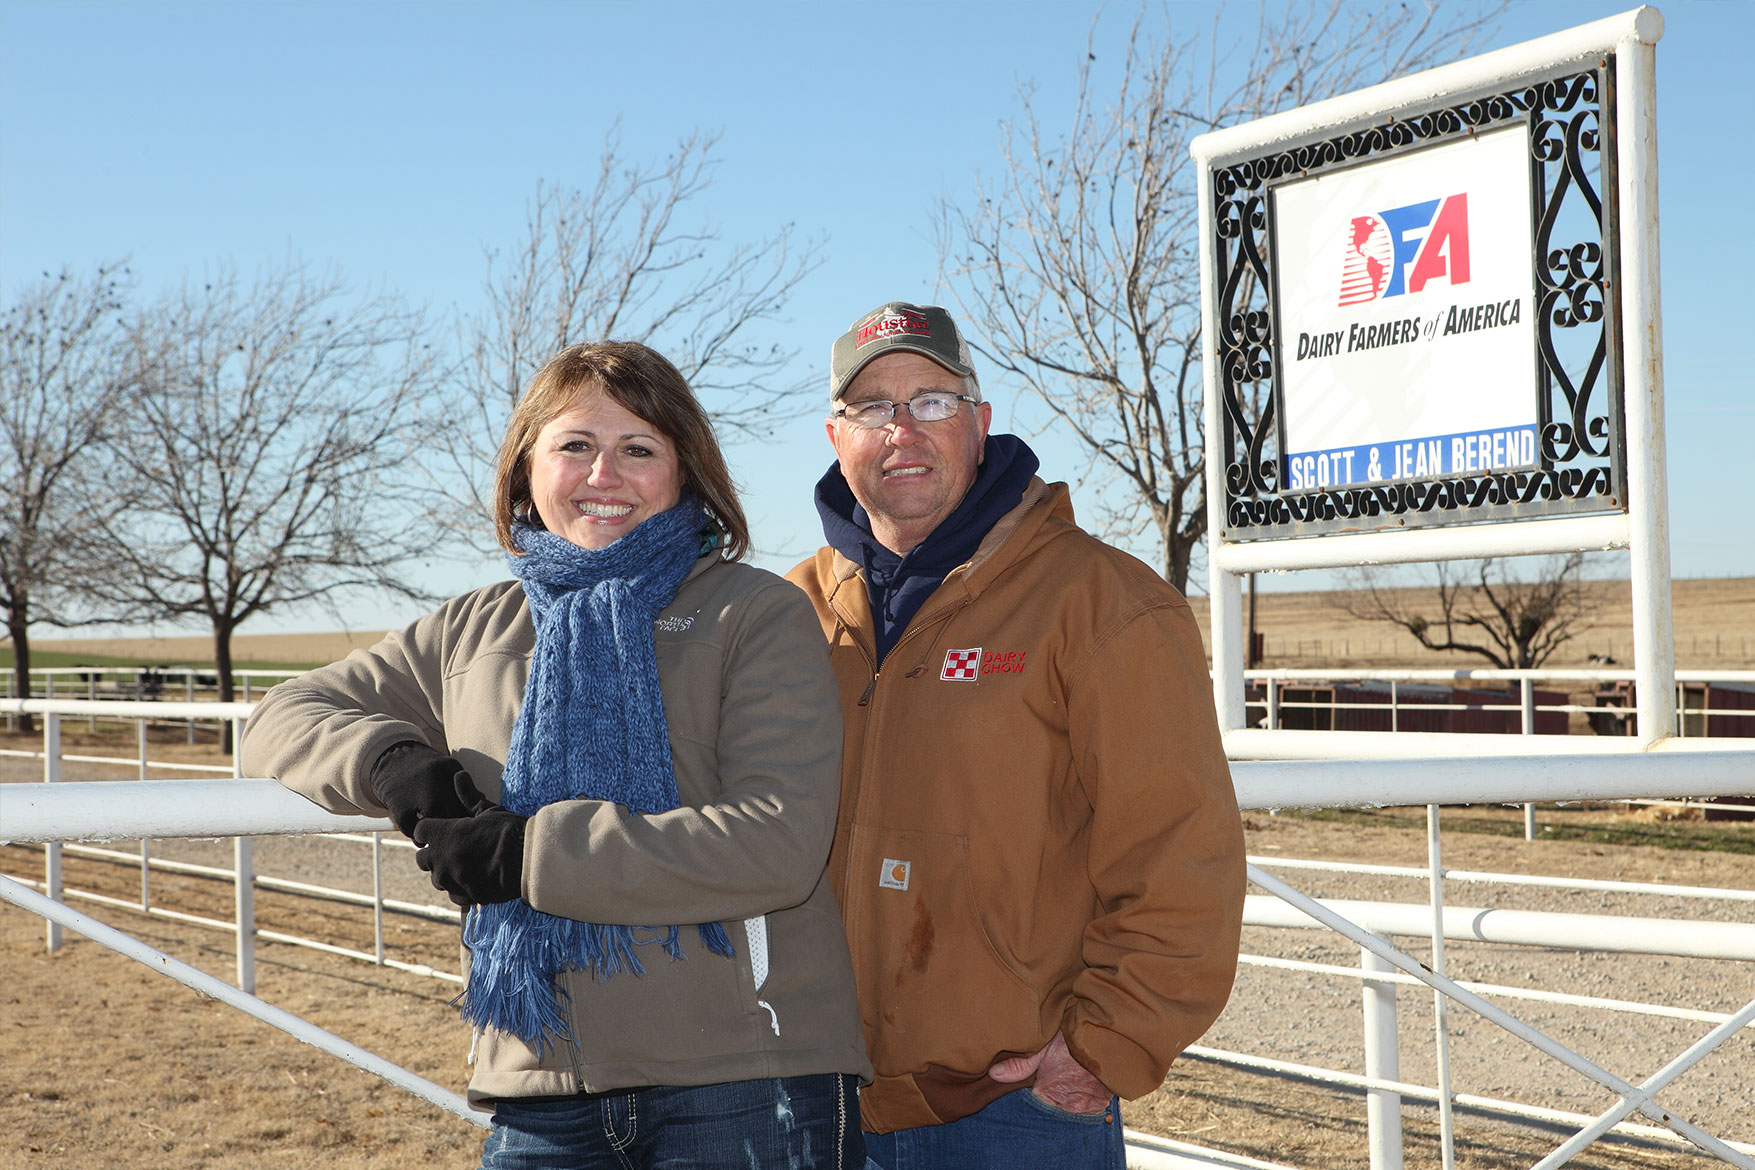 Scott and Jean Berend pose for a photo in front of their dairy sign.